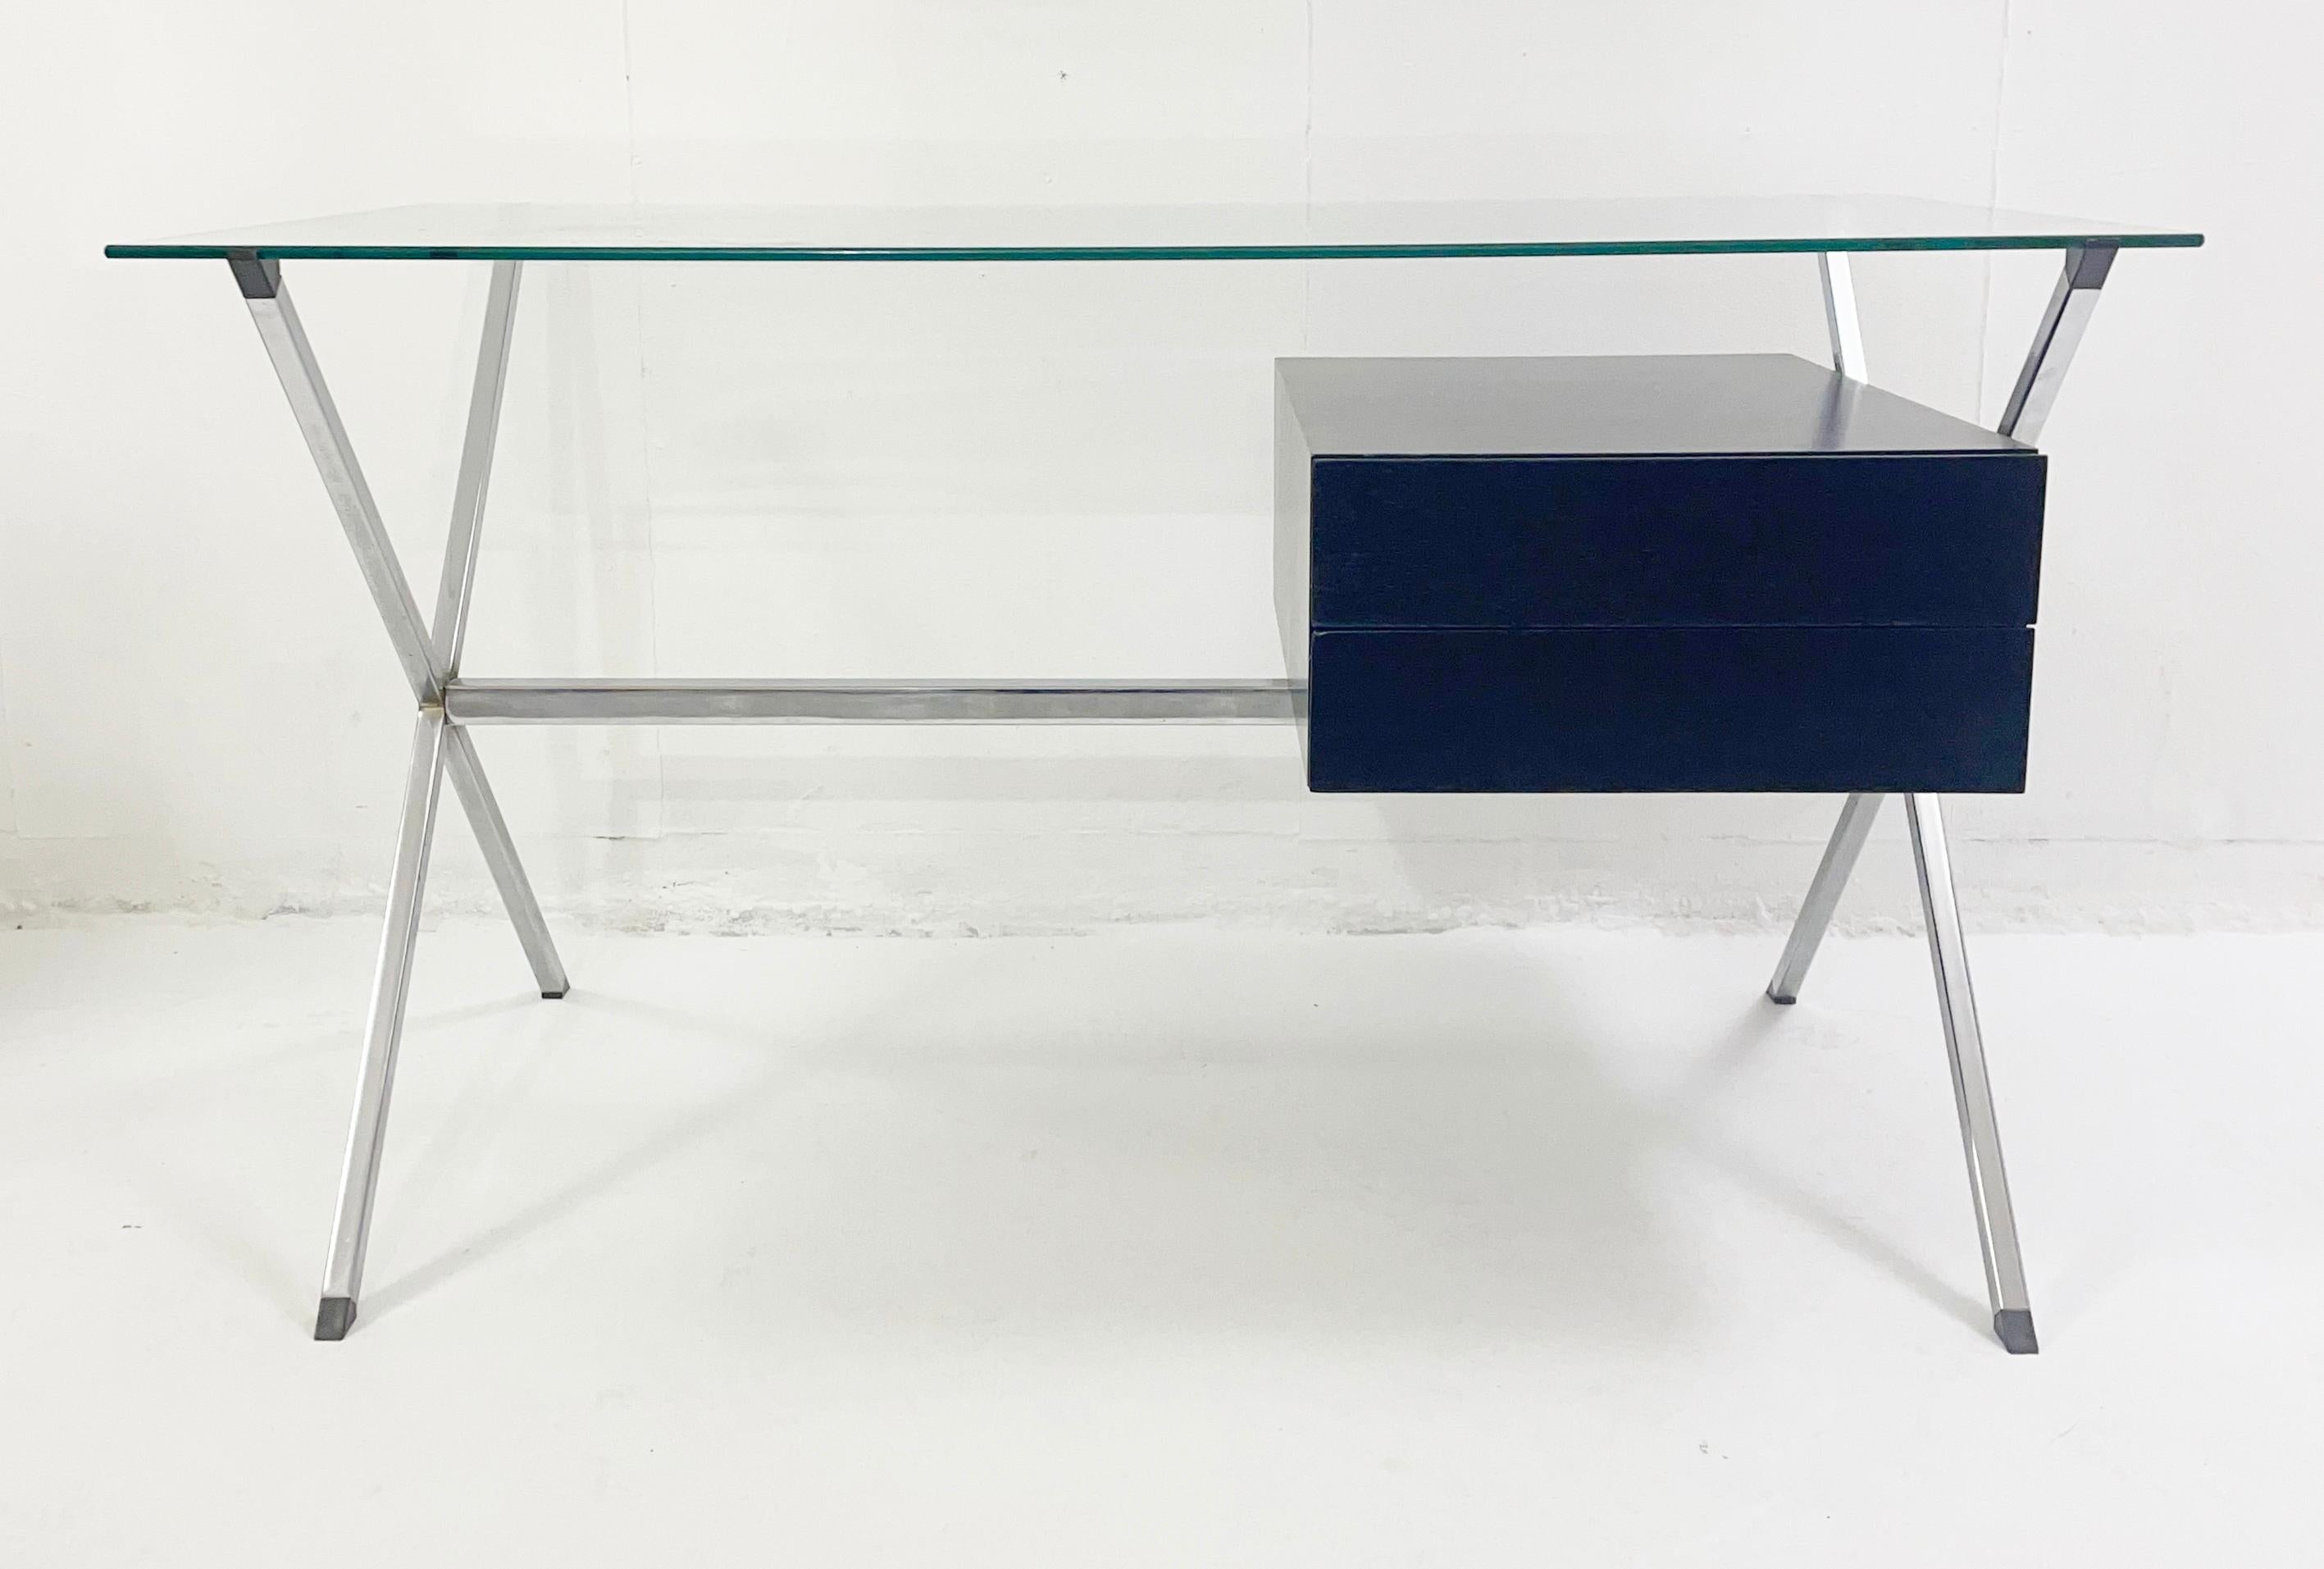 Franco Albini Minimalist desk for Knoll International, 1950s
Mid-Century Modern European desk. 
Franco Albini was an Italian architect and designer. He was a very important figure in the Rationalist Movement. He excelled in architectural,